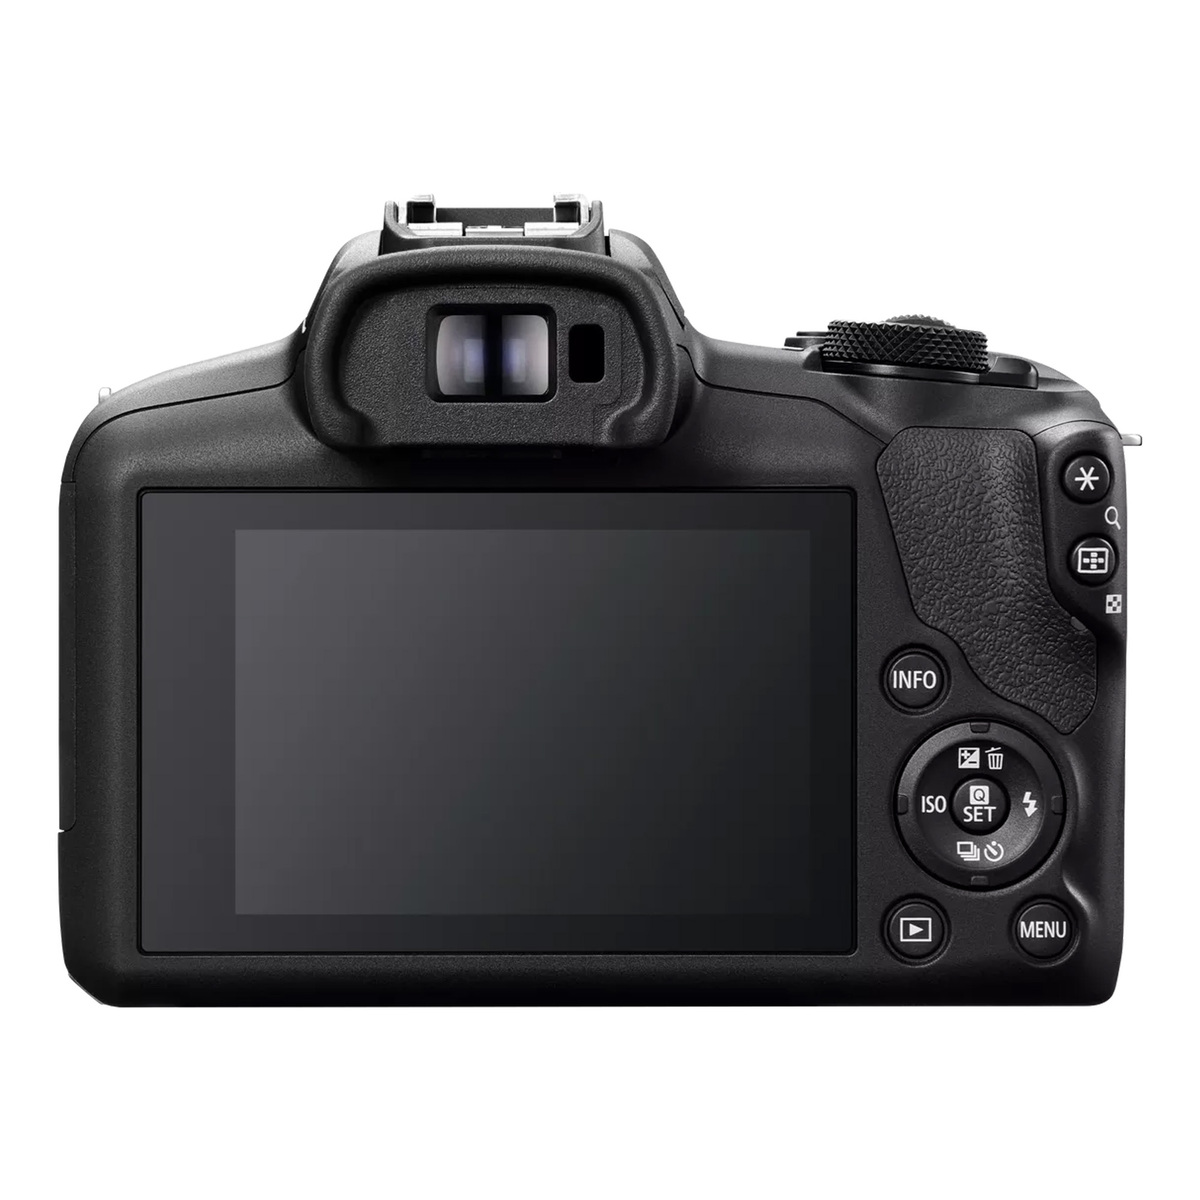 Canon 24 MP Mirrorless Digital Camera with RF-S18-45mm F/4.5-6.3 IS STM Lens, Black, EOS R100